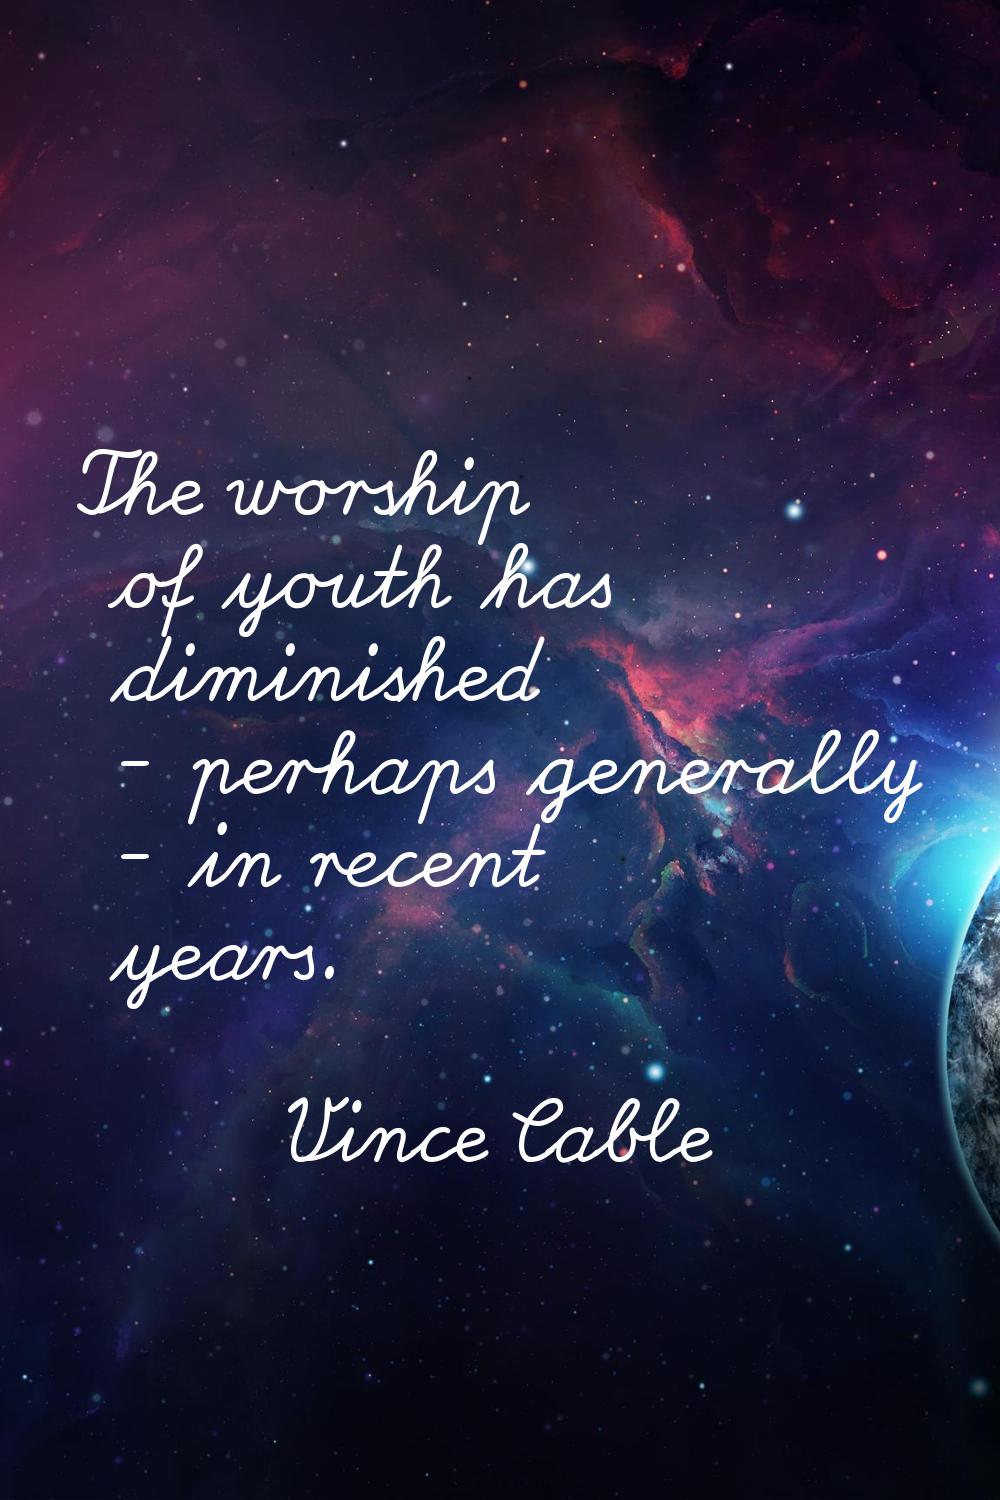 The worship of youth has diminished - perhaps generally - in recent years.